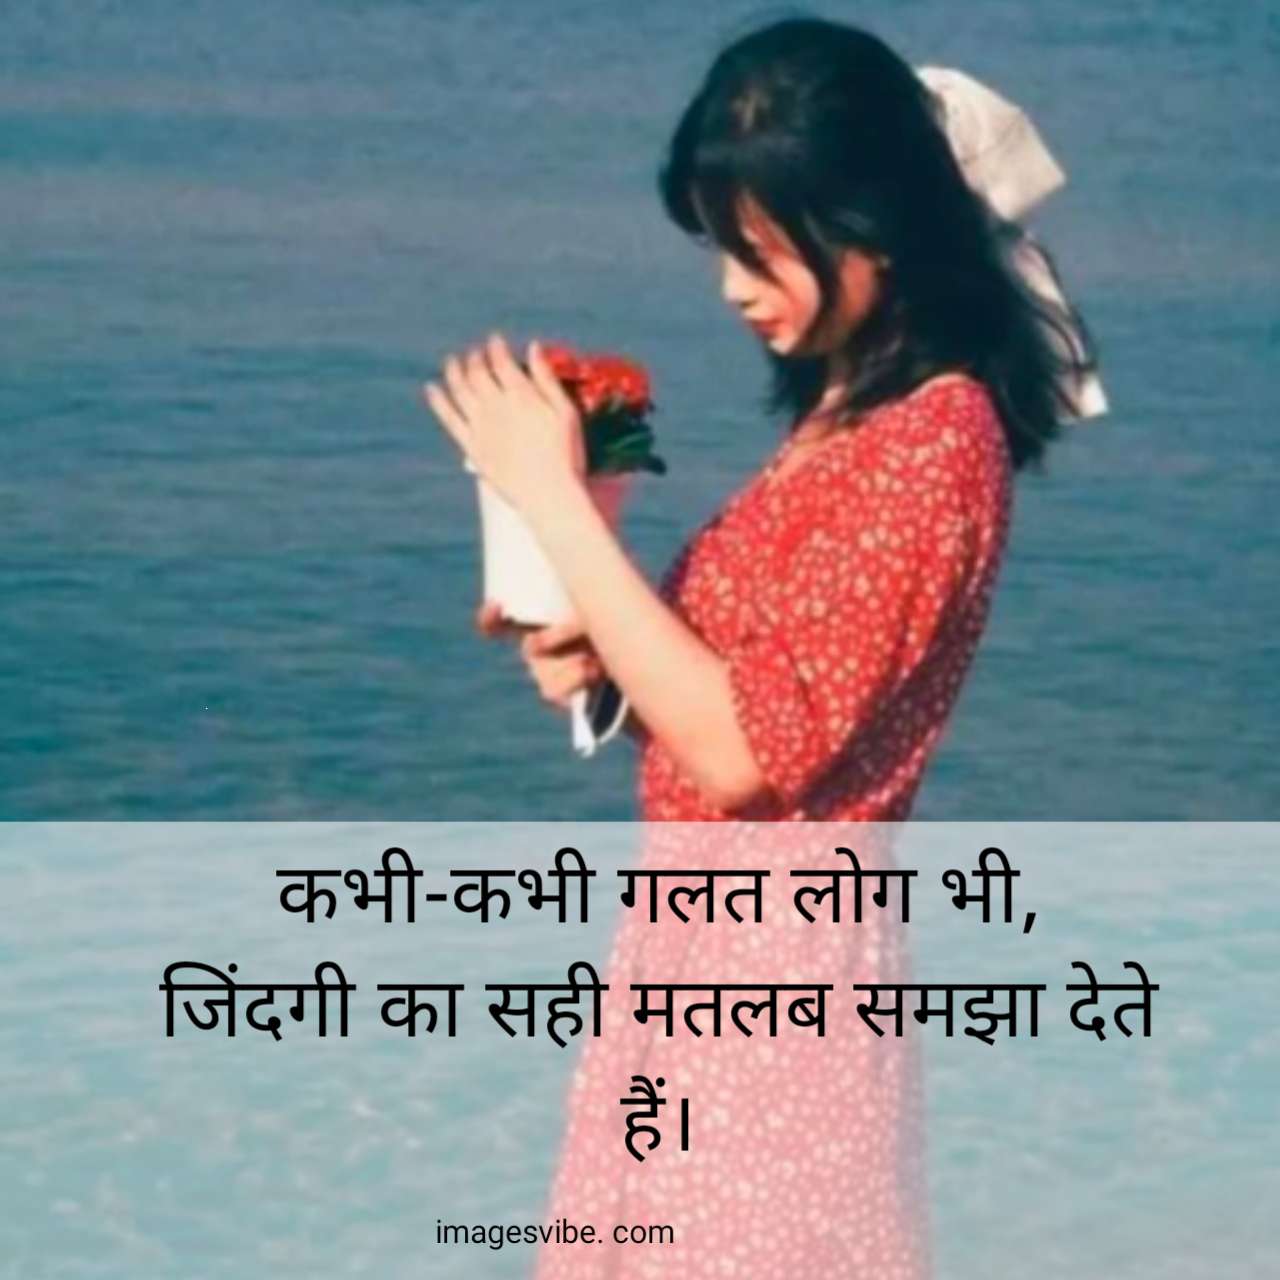 Images With Quotes About Life In Hindi2 